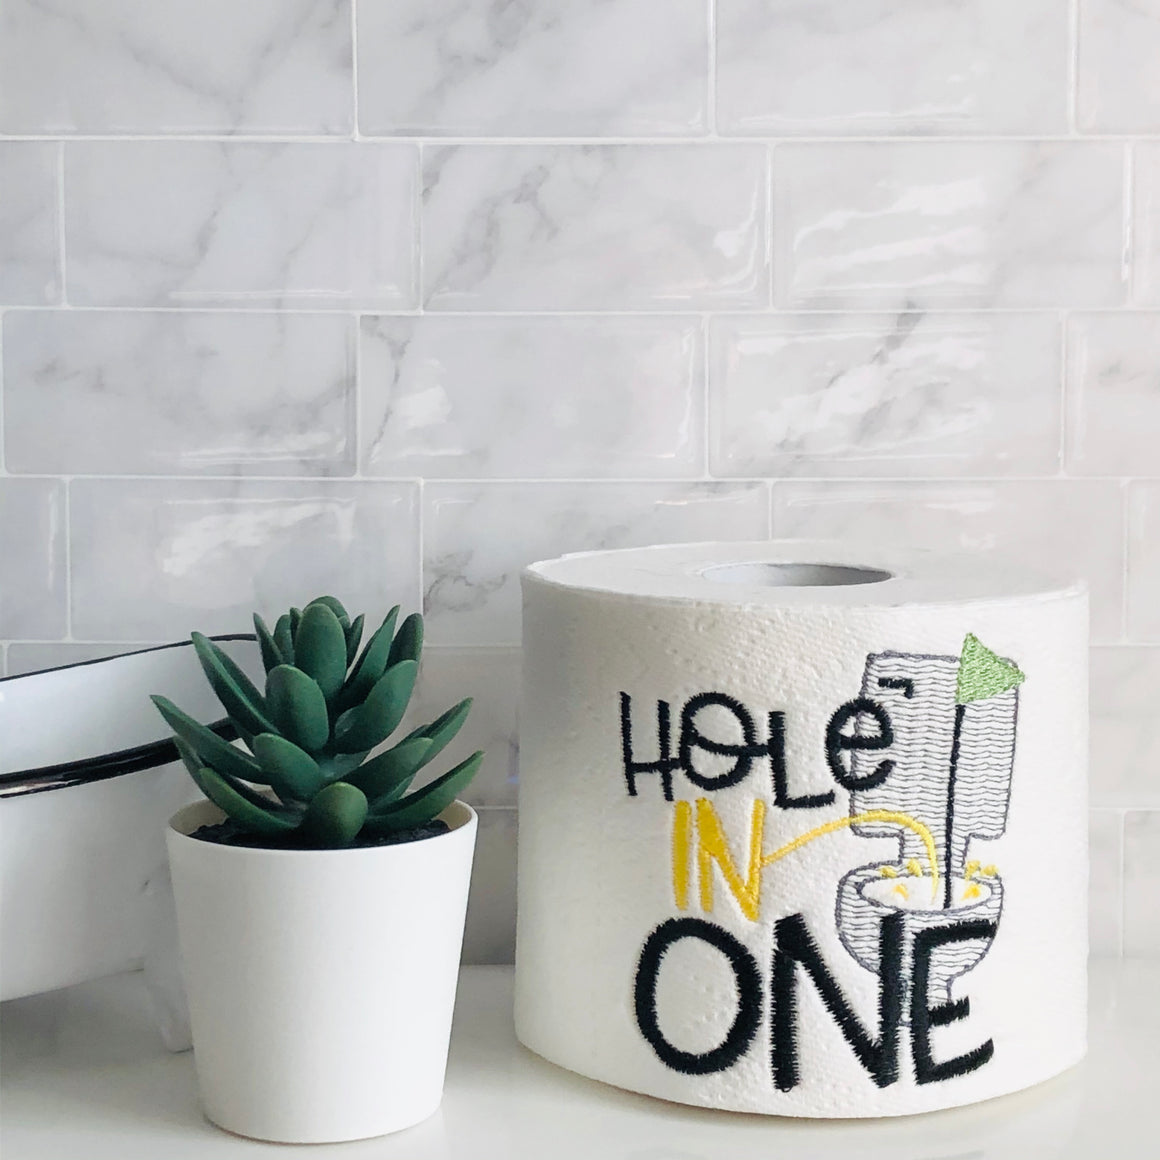 "Hole in One" Gift for Golfers Funny Toilet Paper